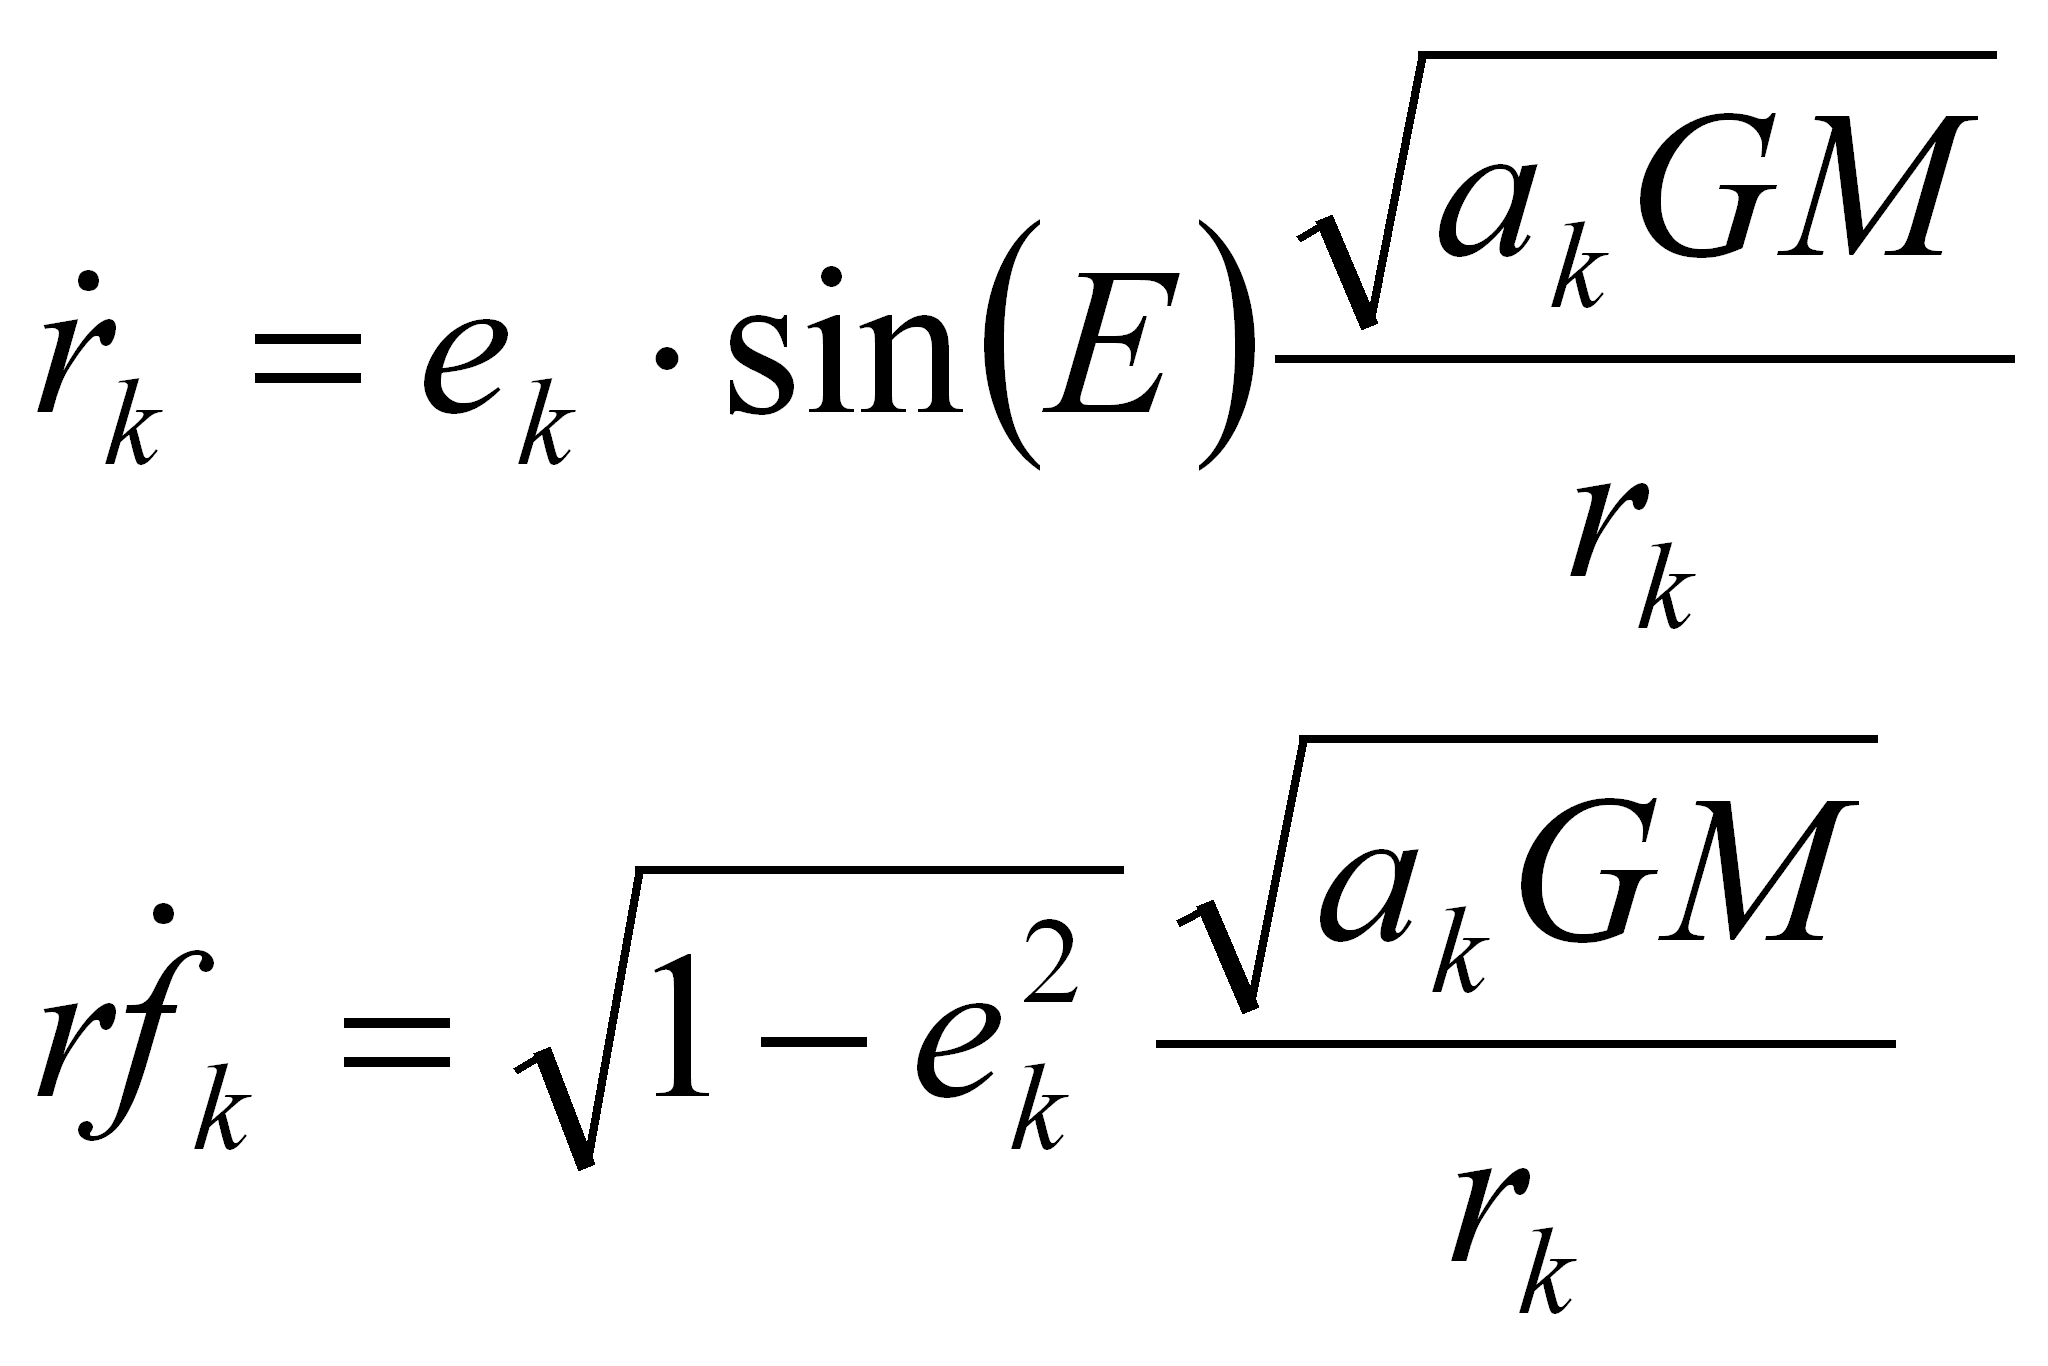 Equations for velocity terms